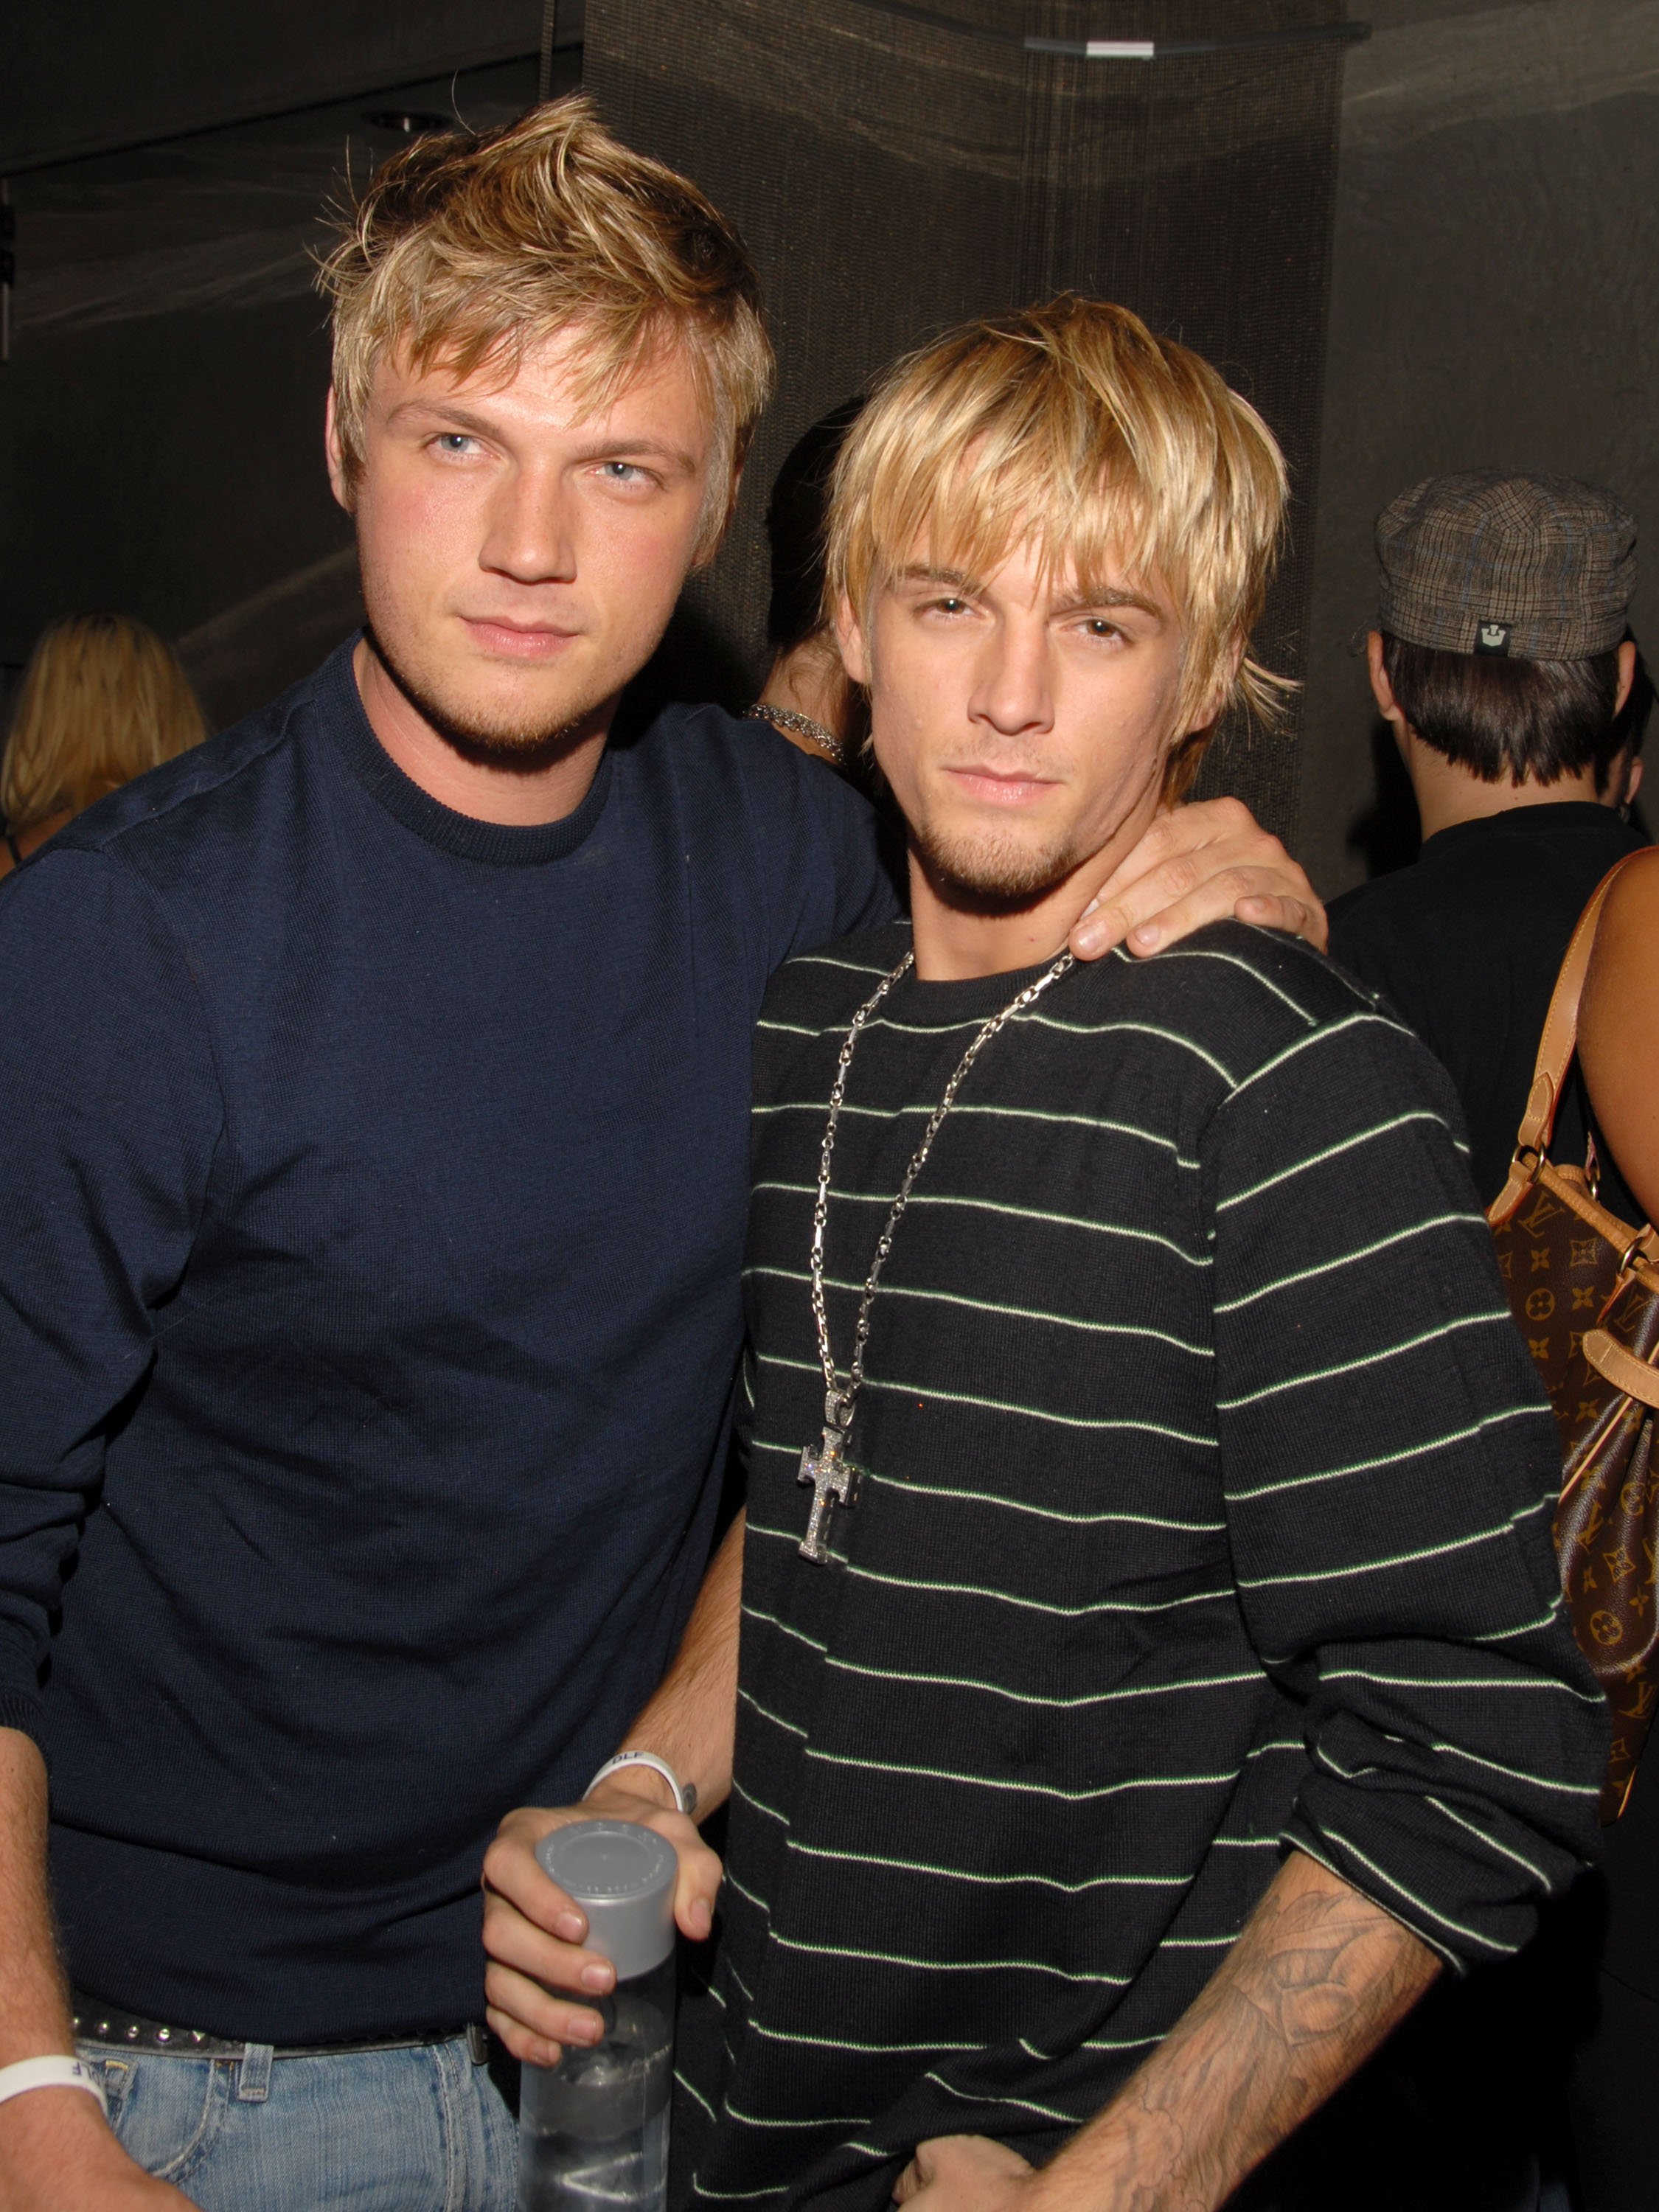 Nick and Aaron Carter during Howie Dorough's Birthday Party at LAX in Hollywood, California, on August 16, 2006 | Source: Getty Images